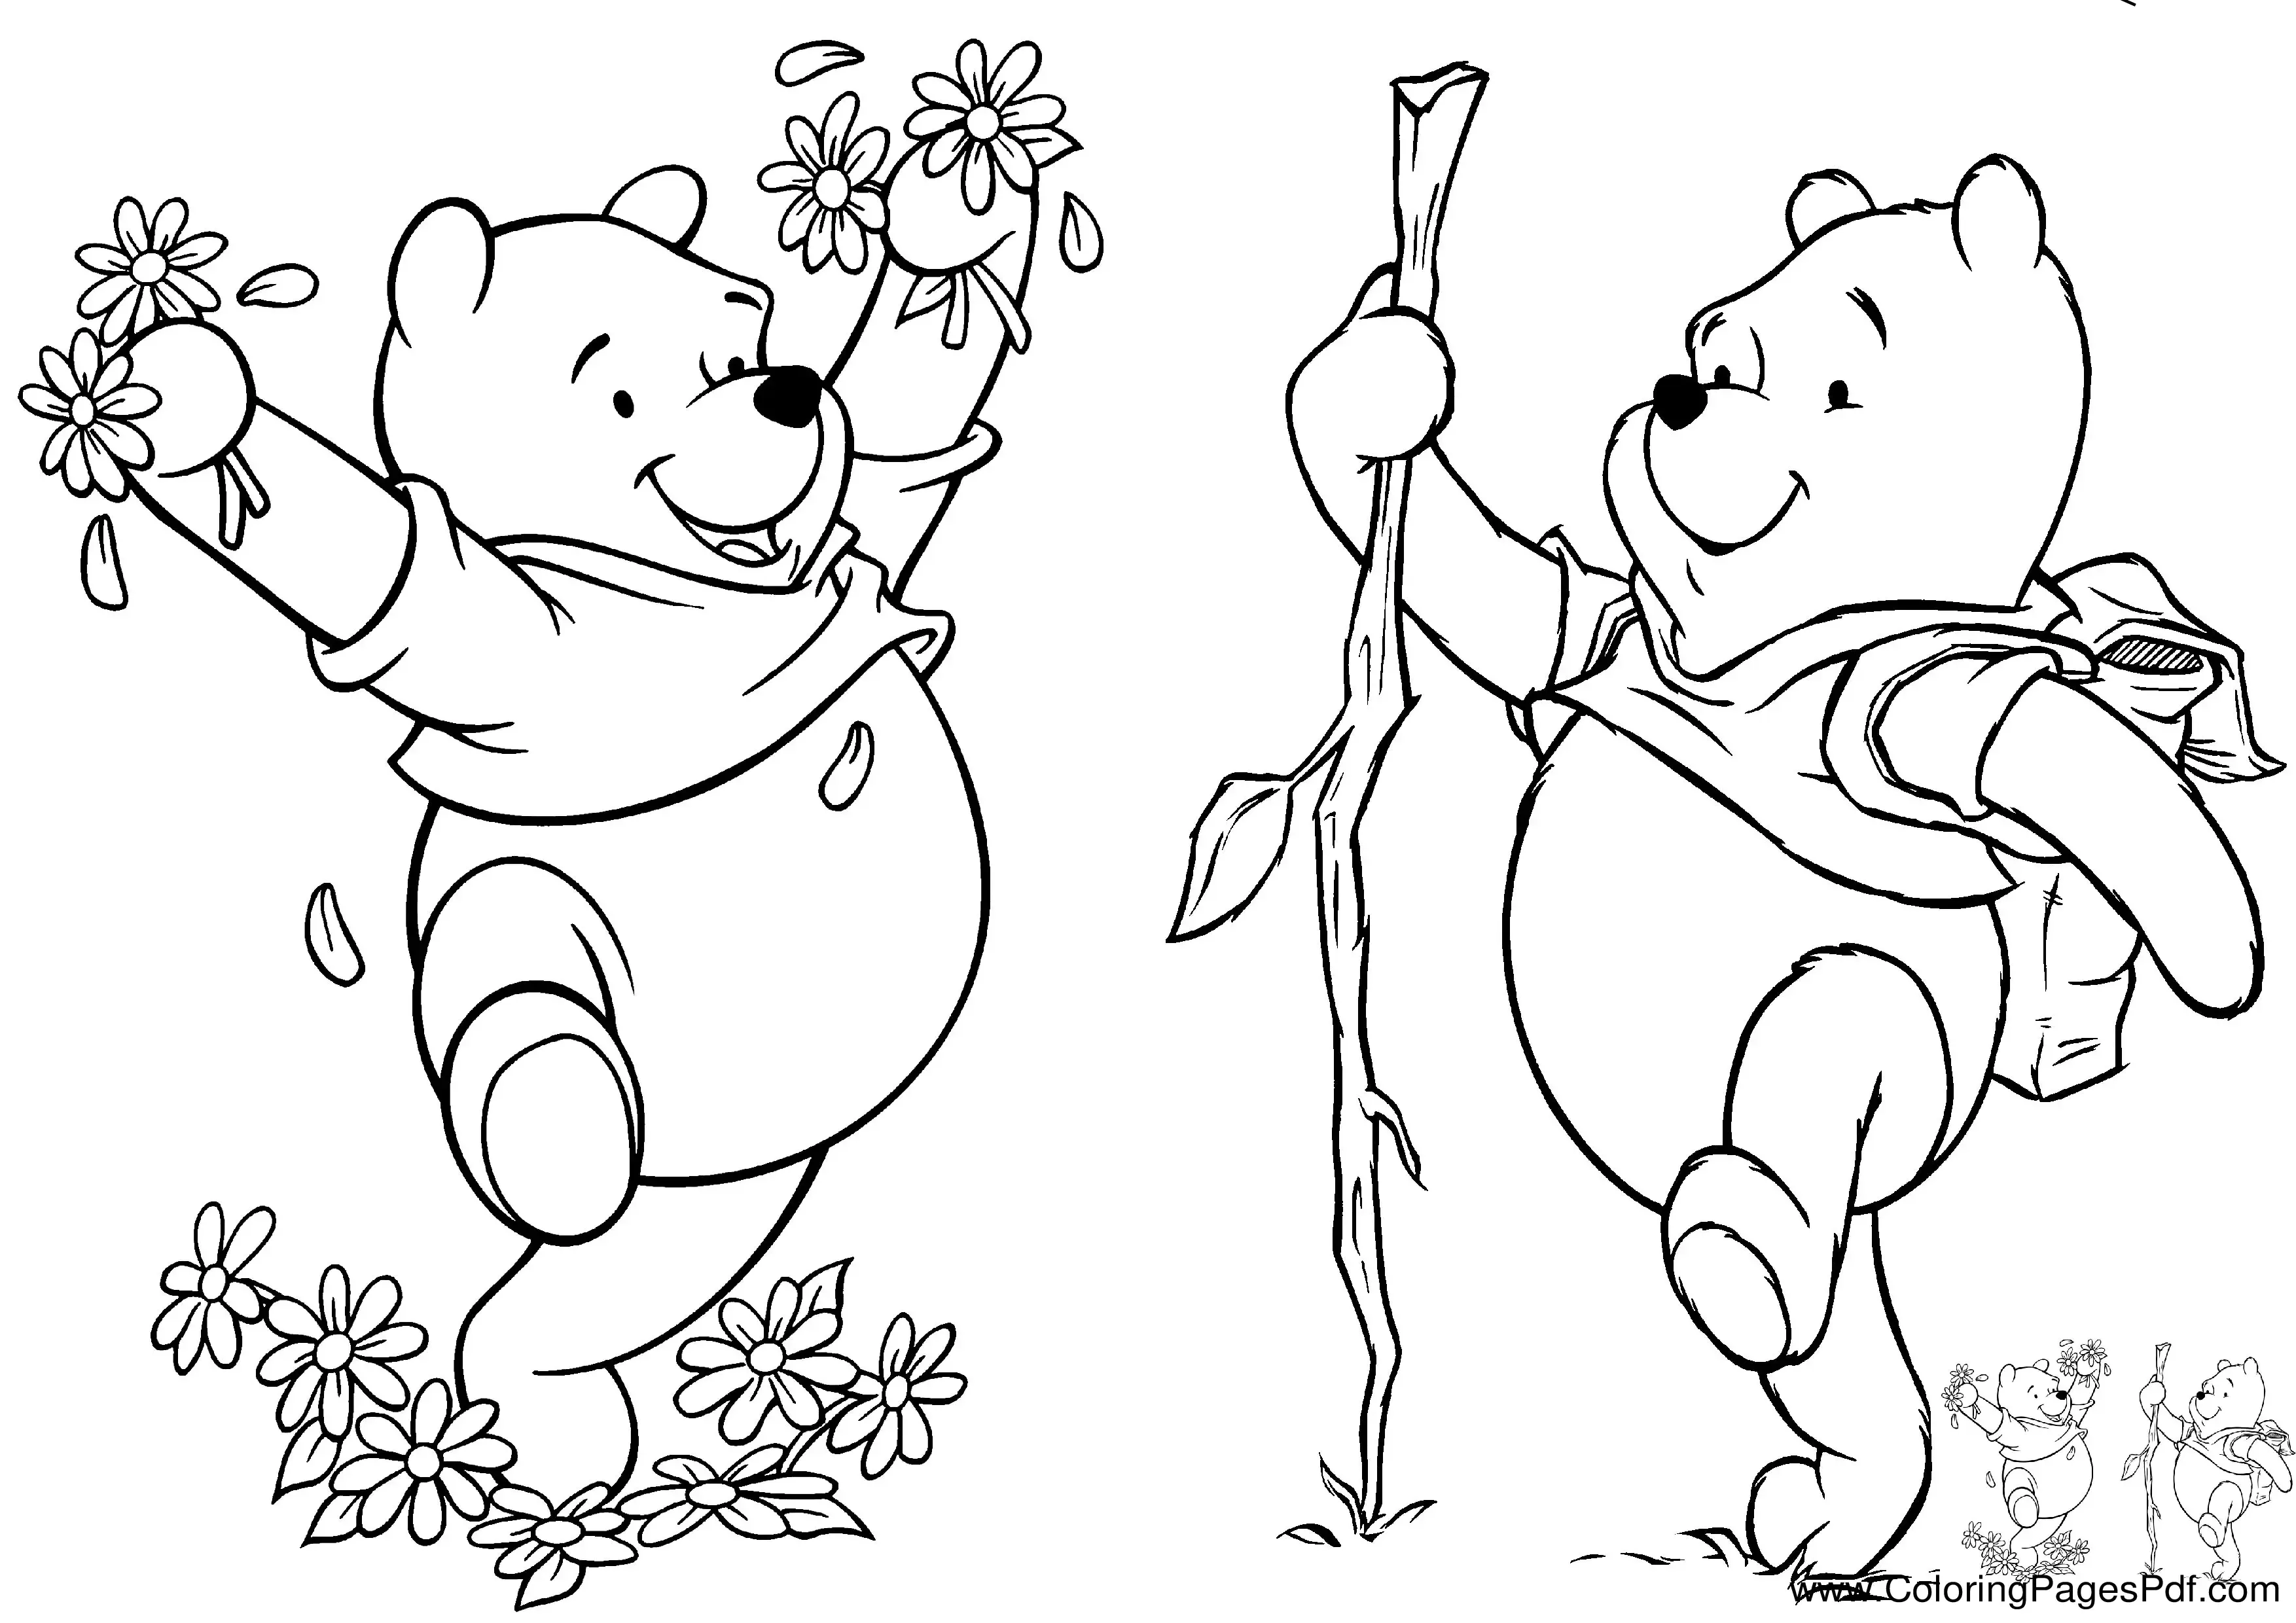 Winnie the pooh coloring pages pdf